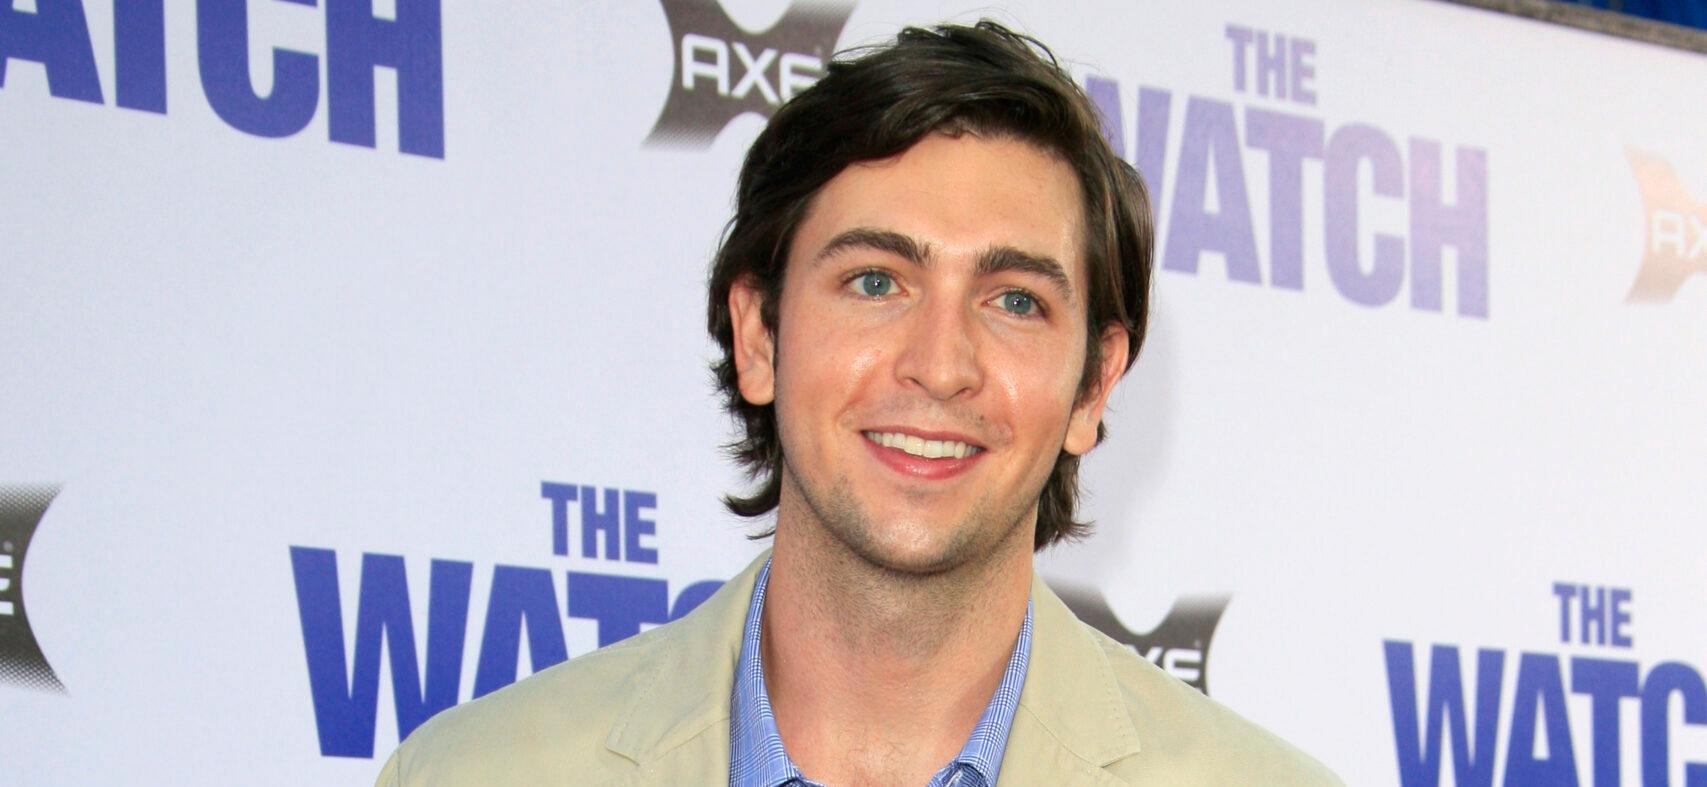 Nicholas Braun at the "The Watch" Premiere at the Chinese Theater